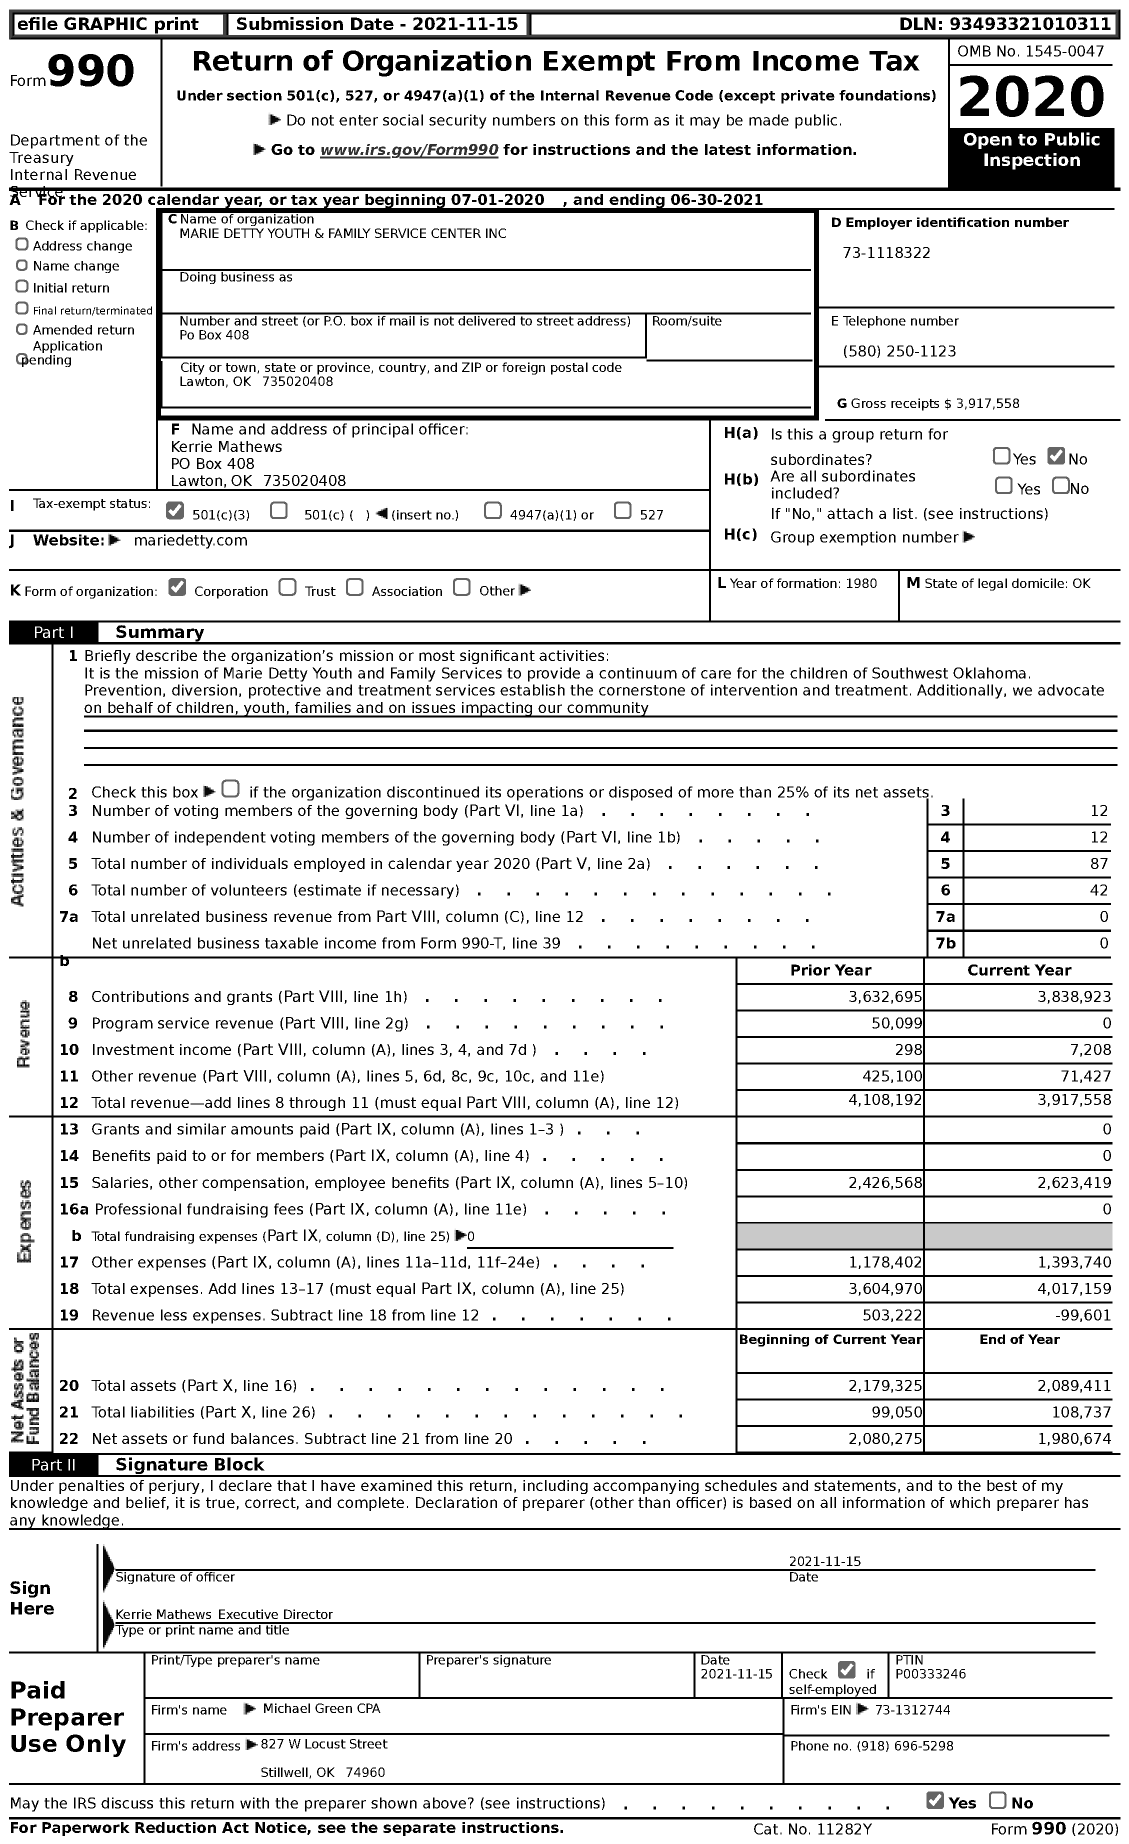 Image of first page of 2020 Form 990 for Marie Detty Youth & Family Services Center